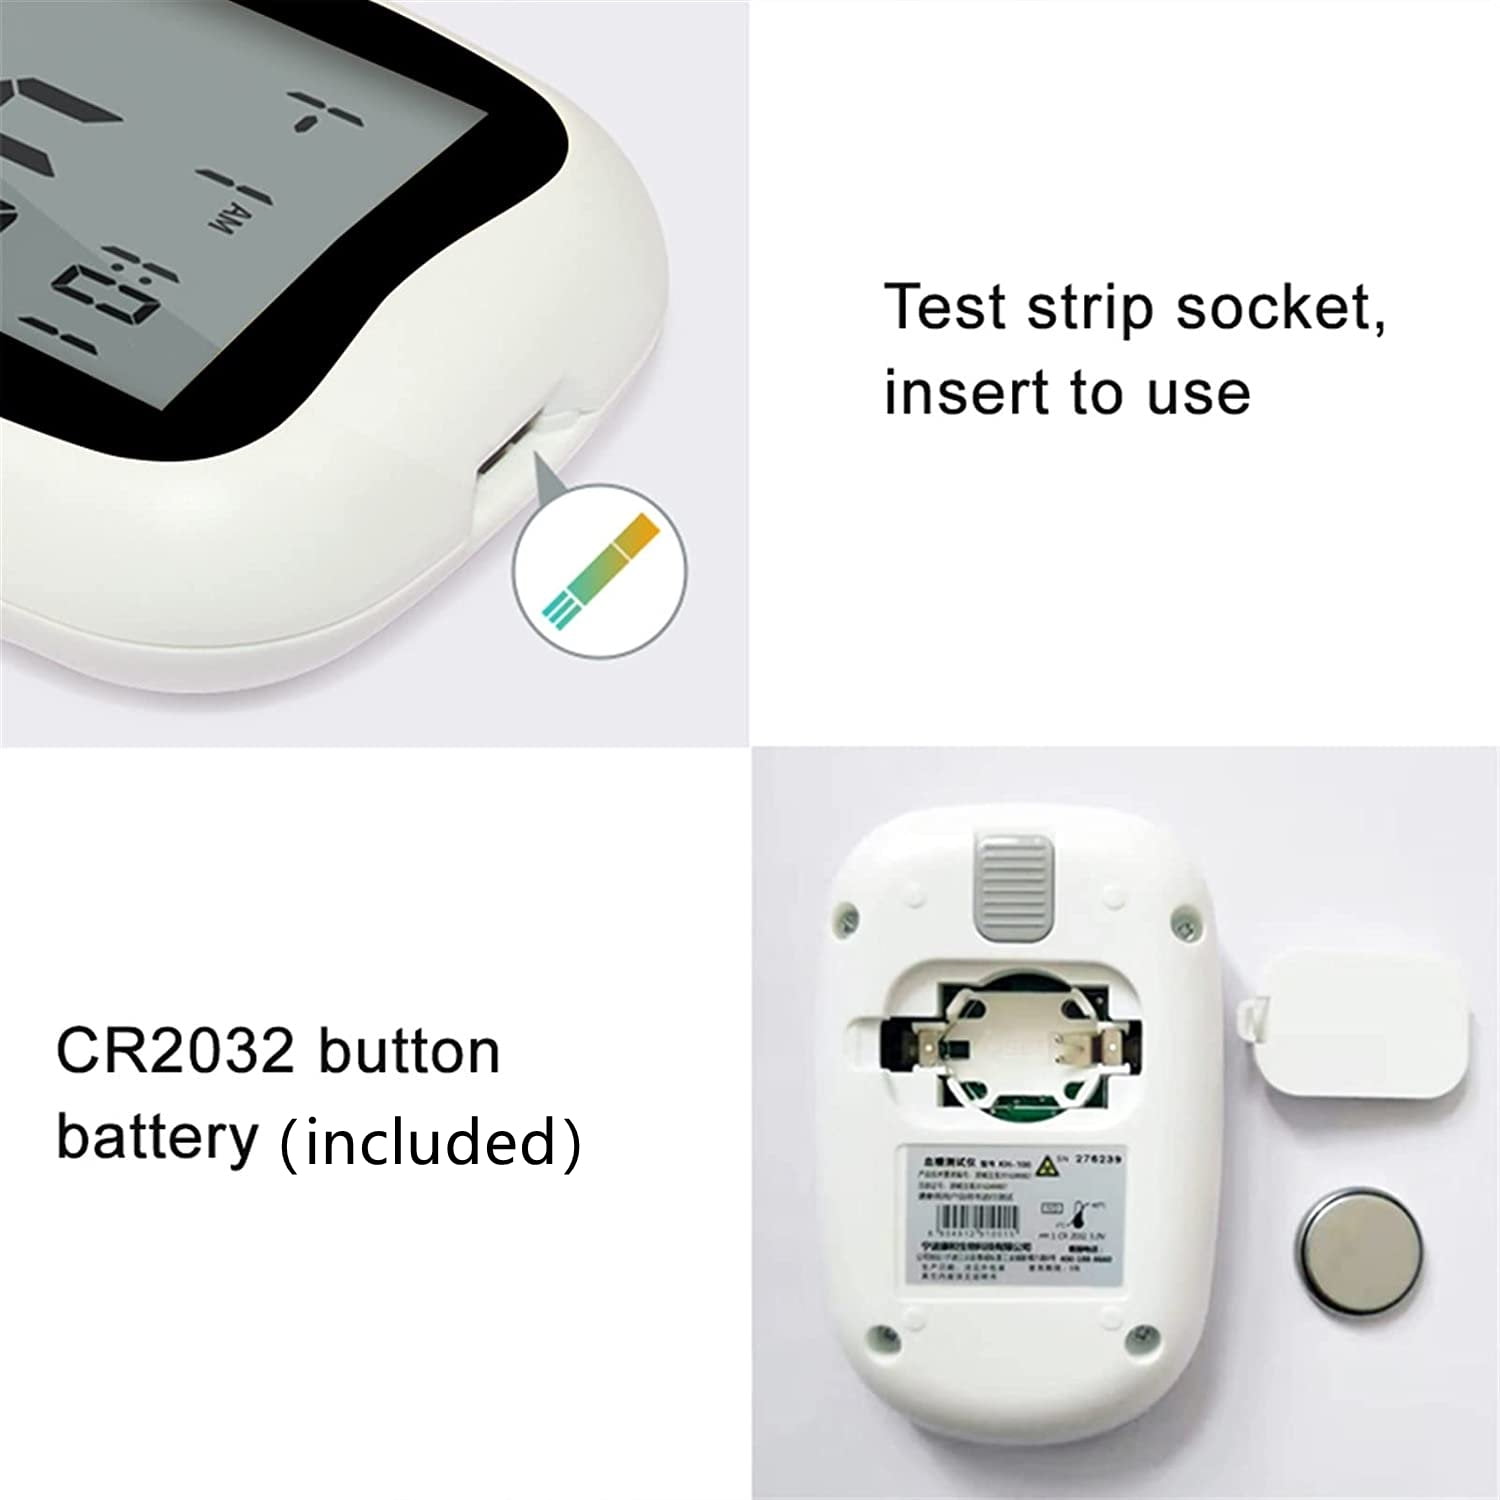 🔥🔥CareSens N Plus Bluetooth Blood Glucose Monitor Kit with 100 Test  Strips🔥🔥